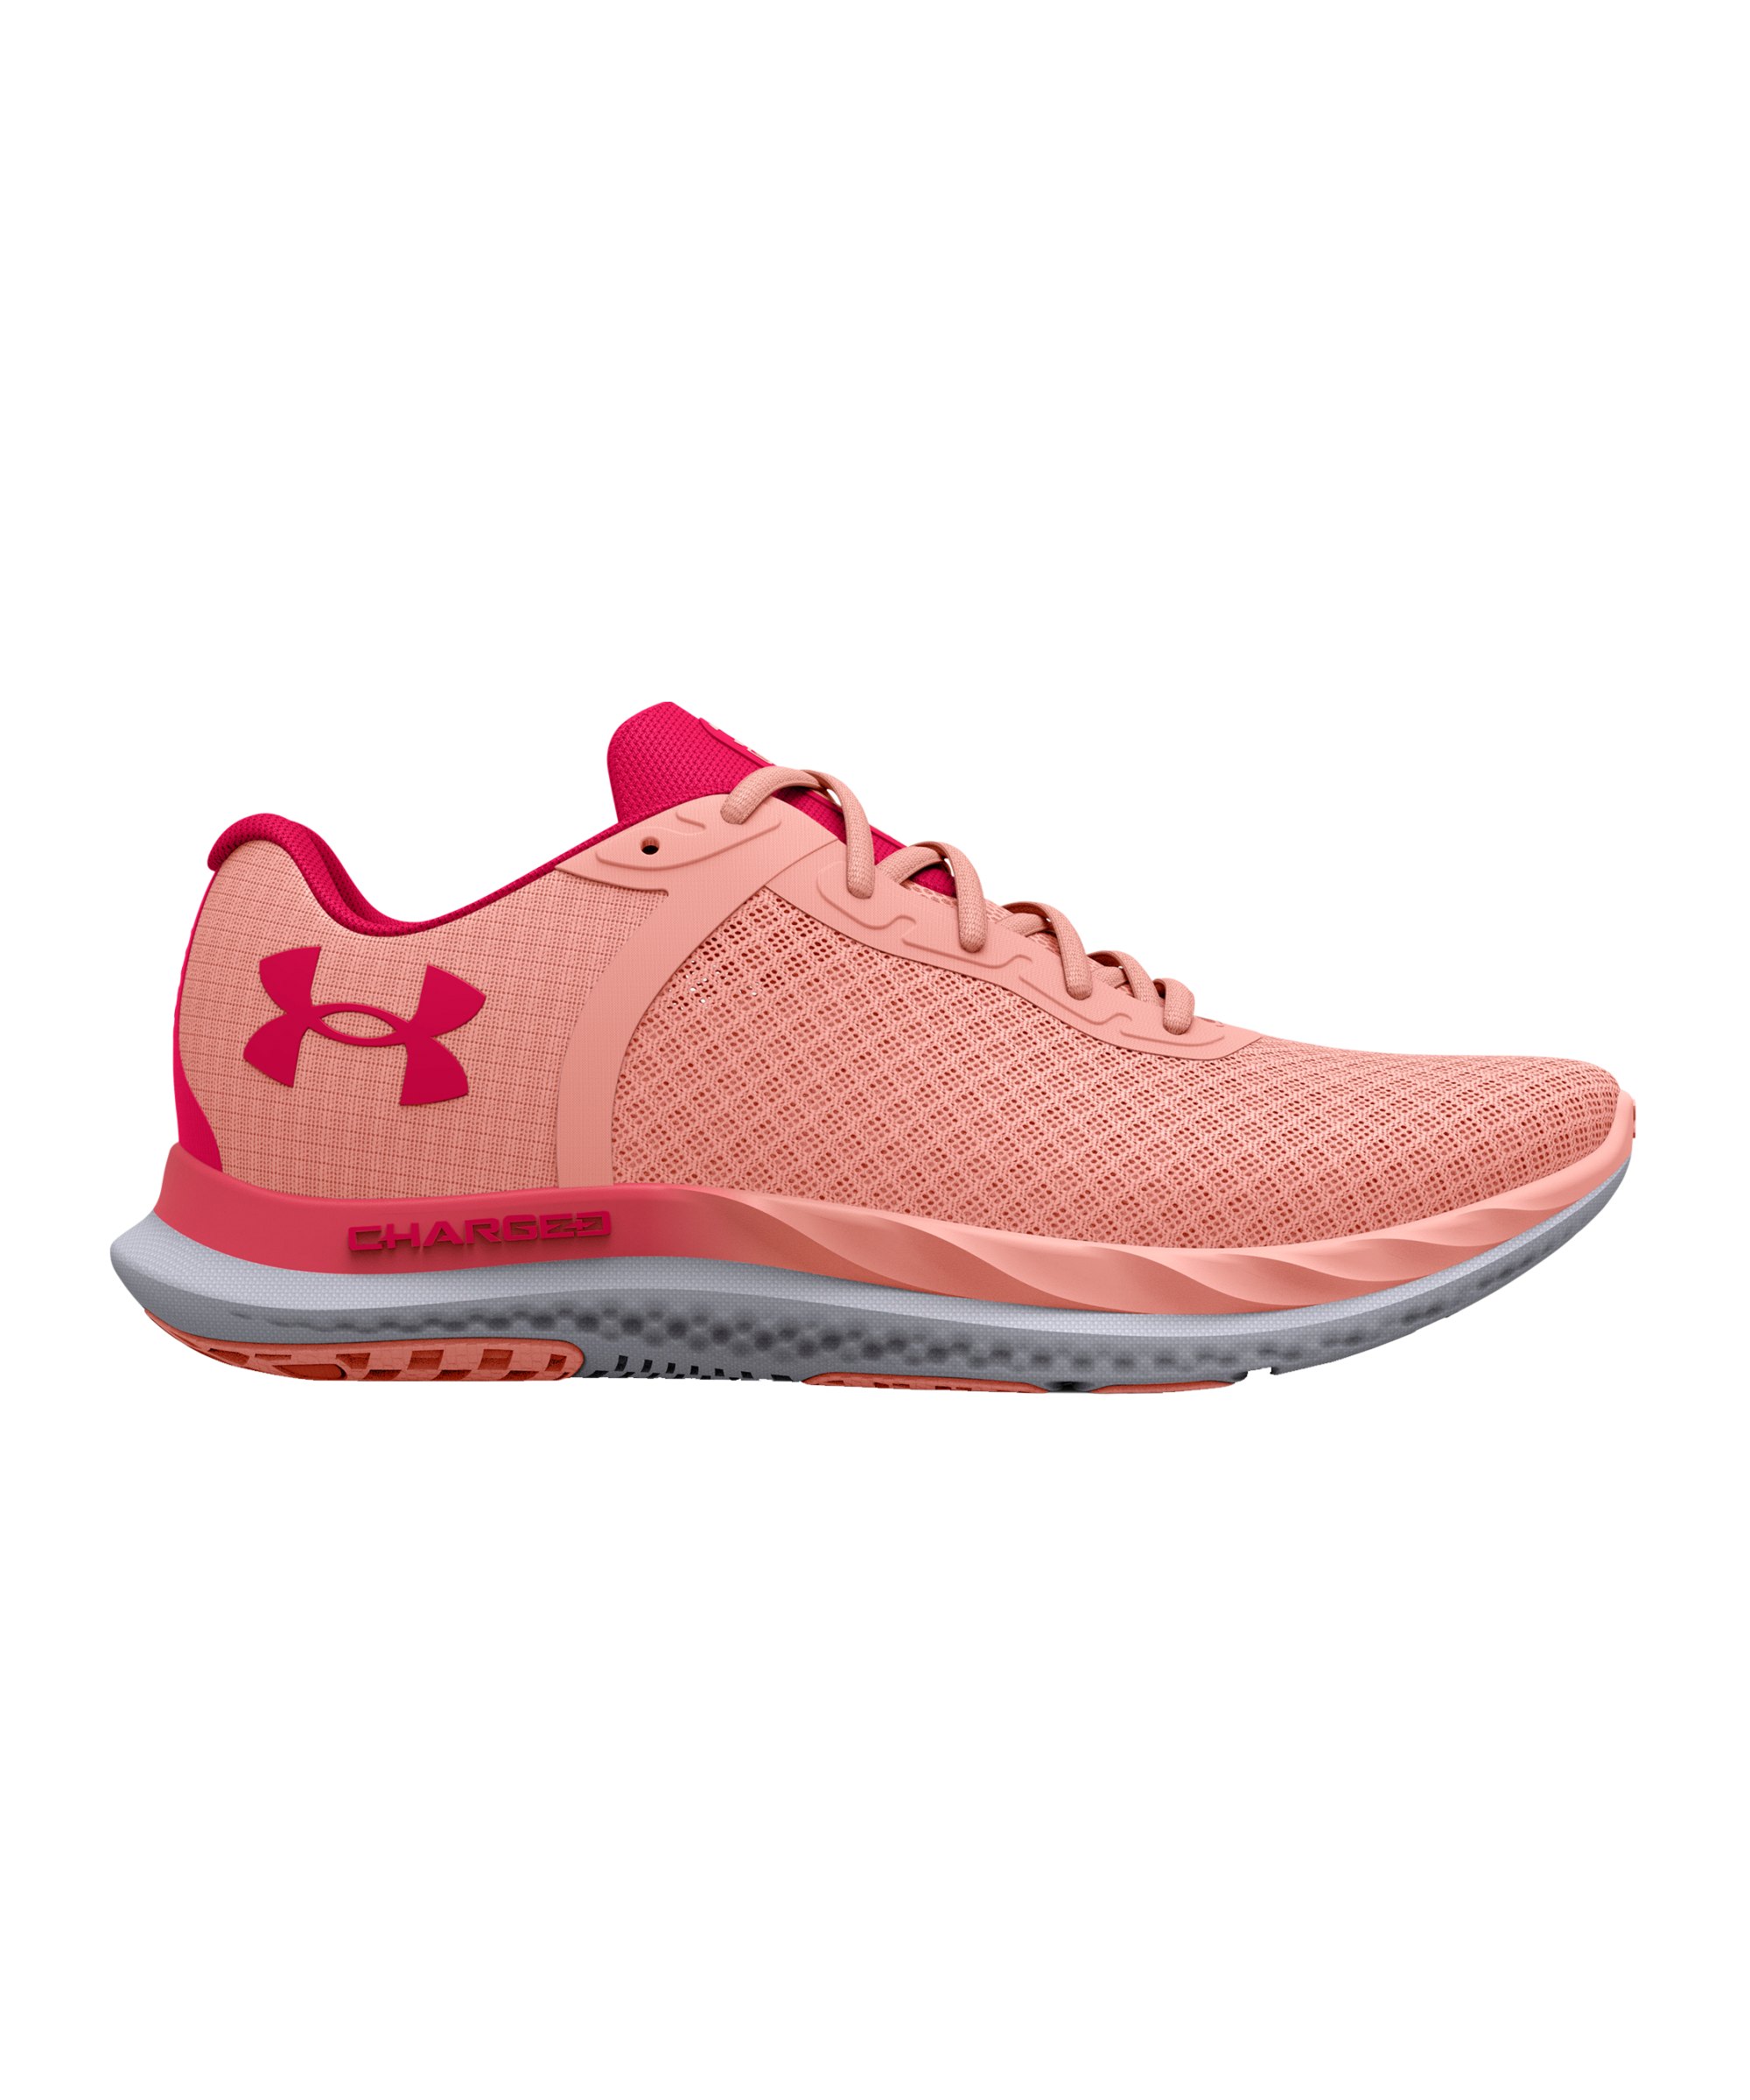 Under Armour Charged Breeze Running Damen F600 - pink